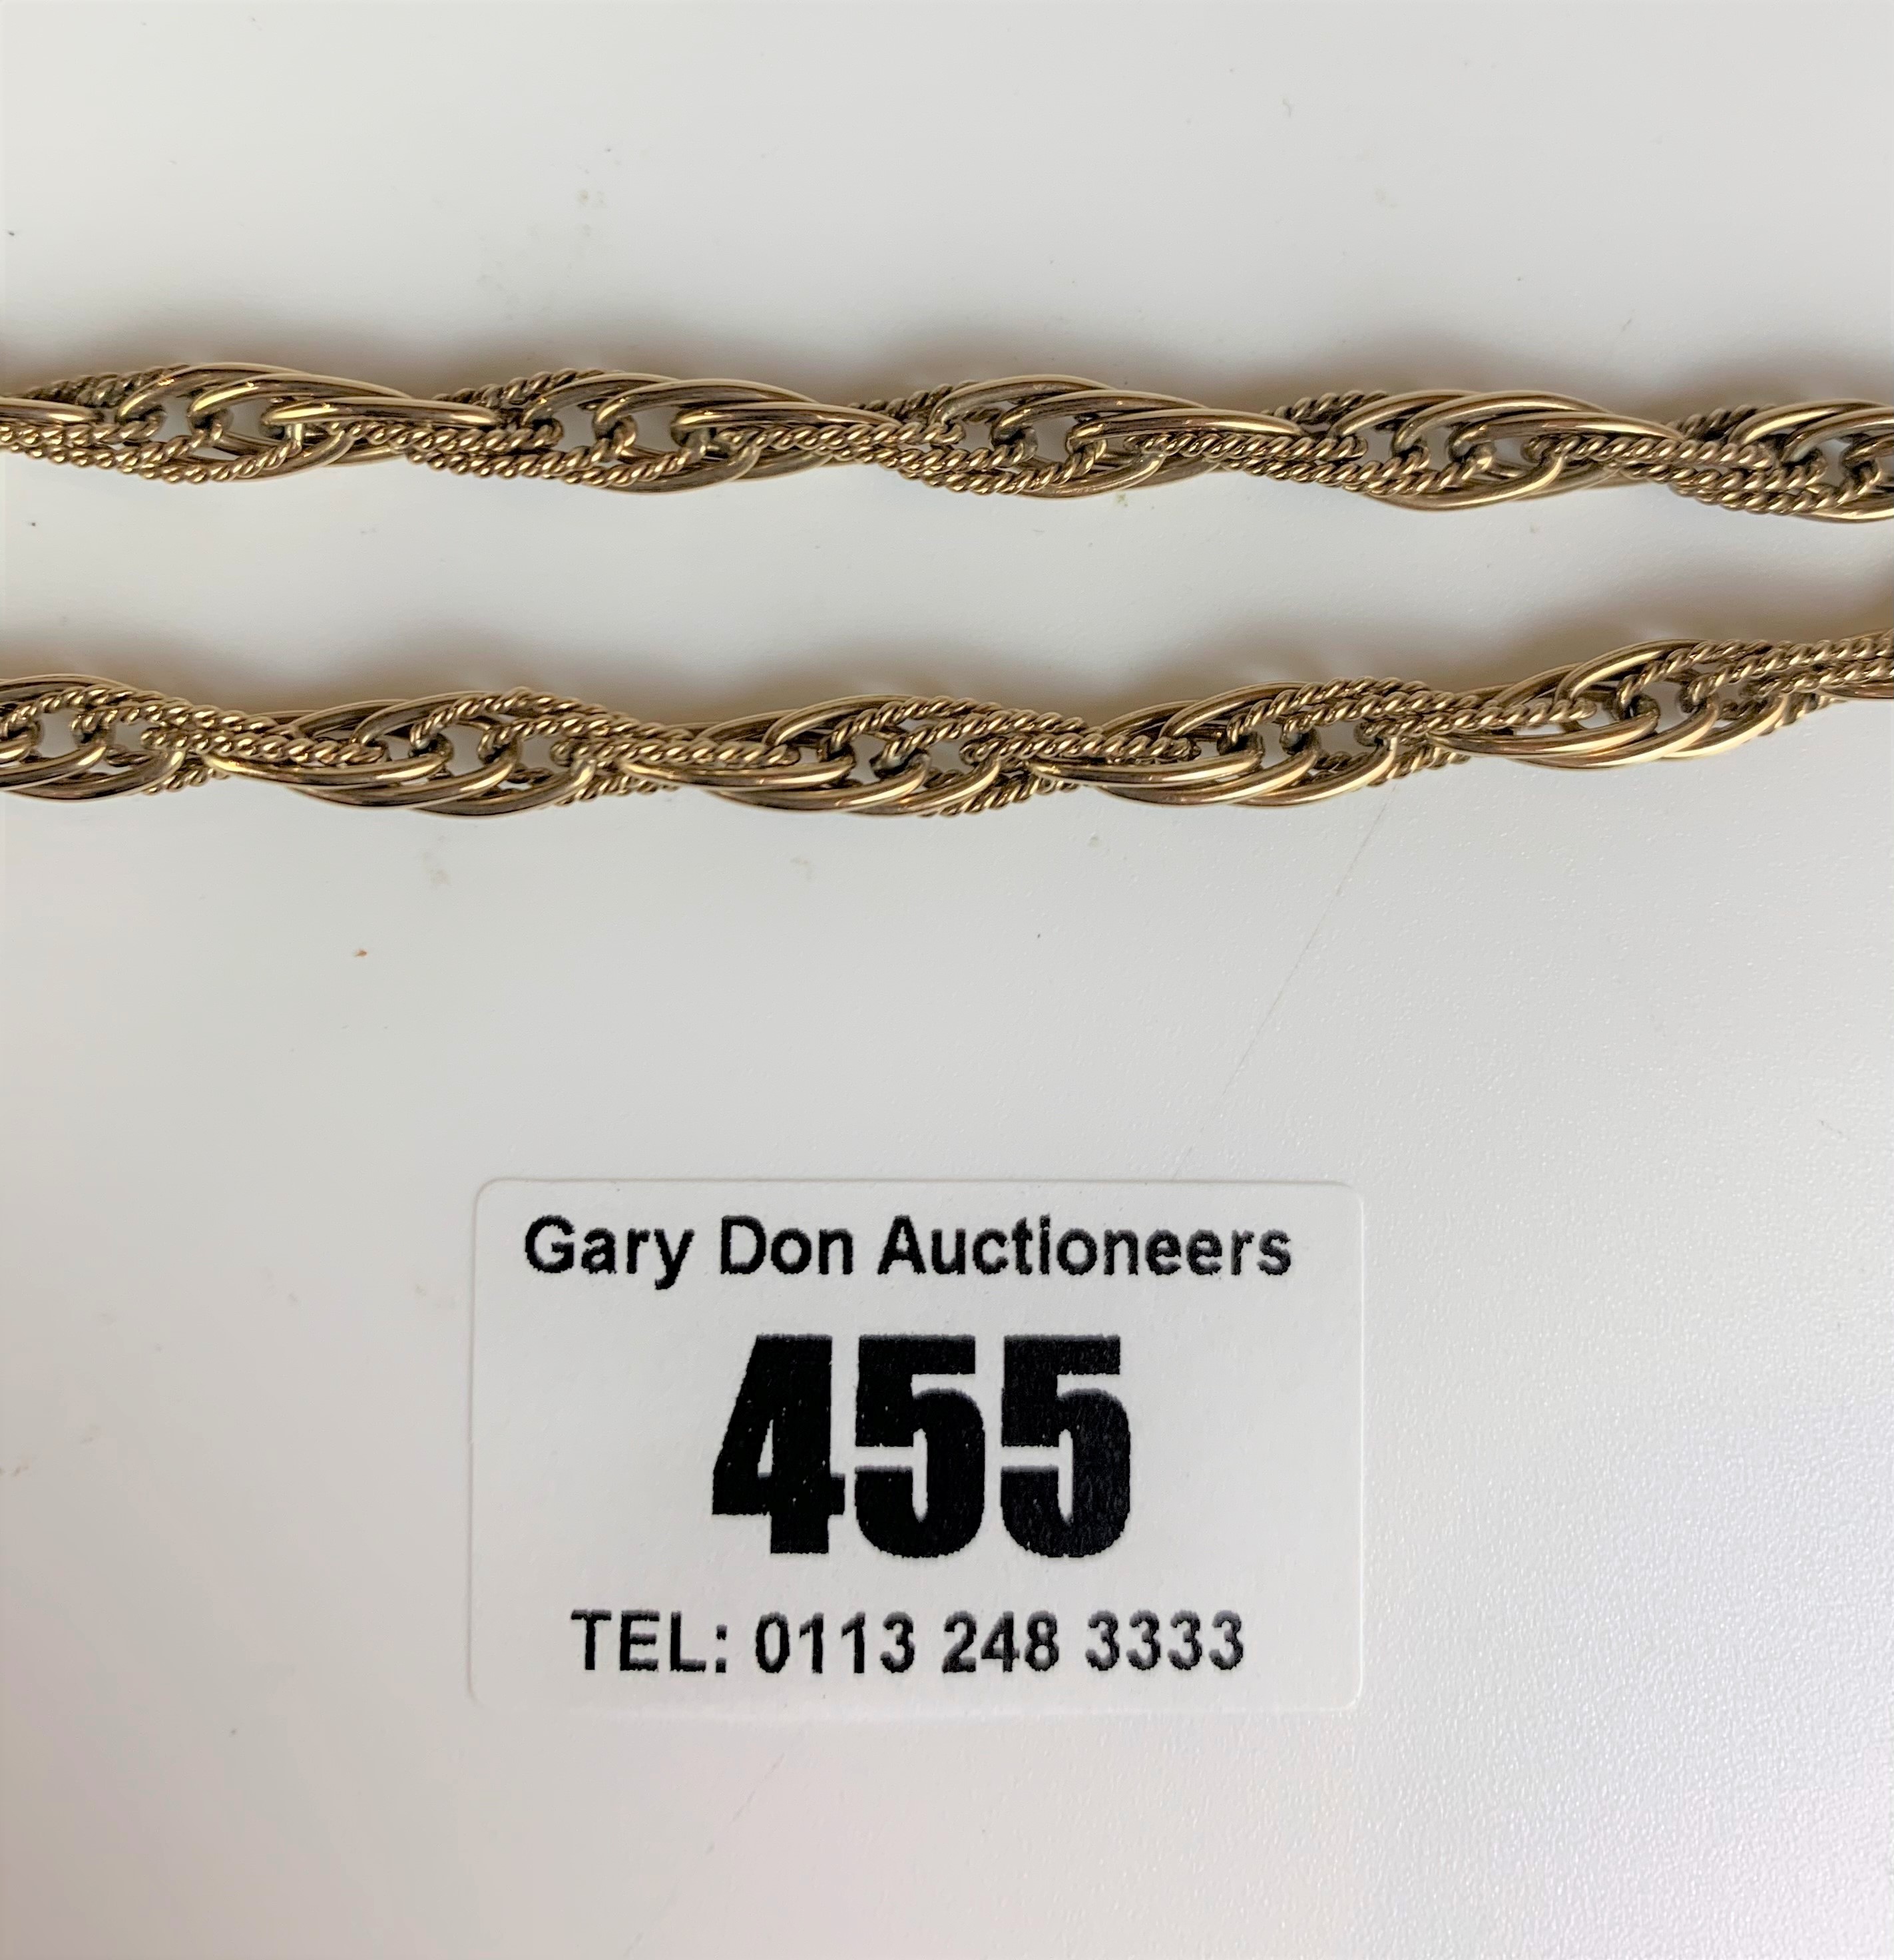 9k gold necklace and fob, length 19” chain, 1” fob. Total w: 34gms - Image 5 of 5